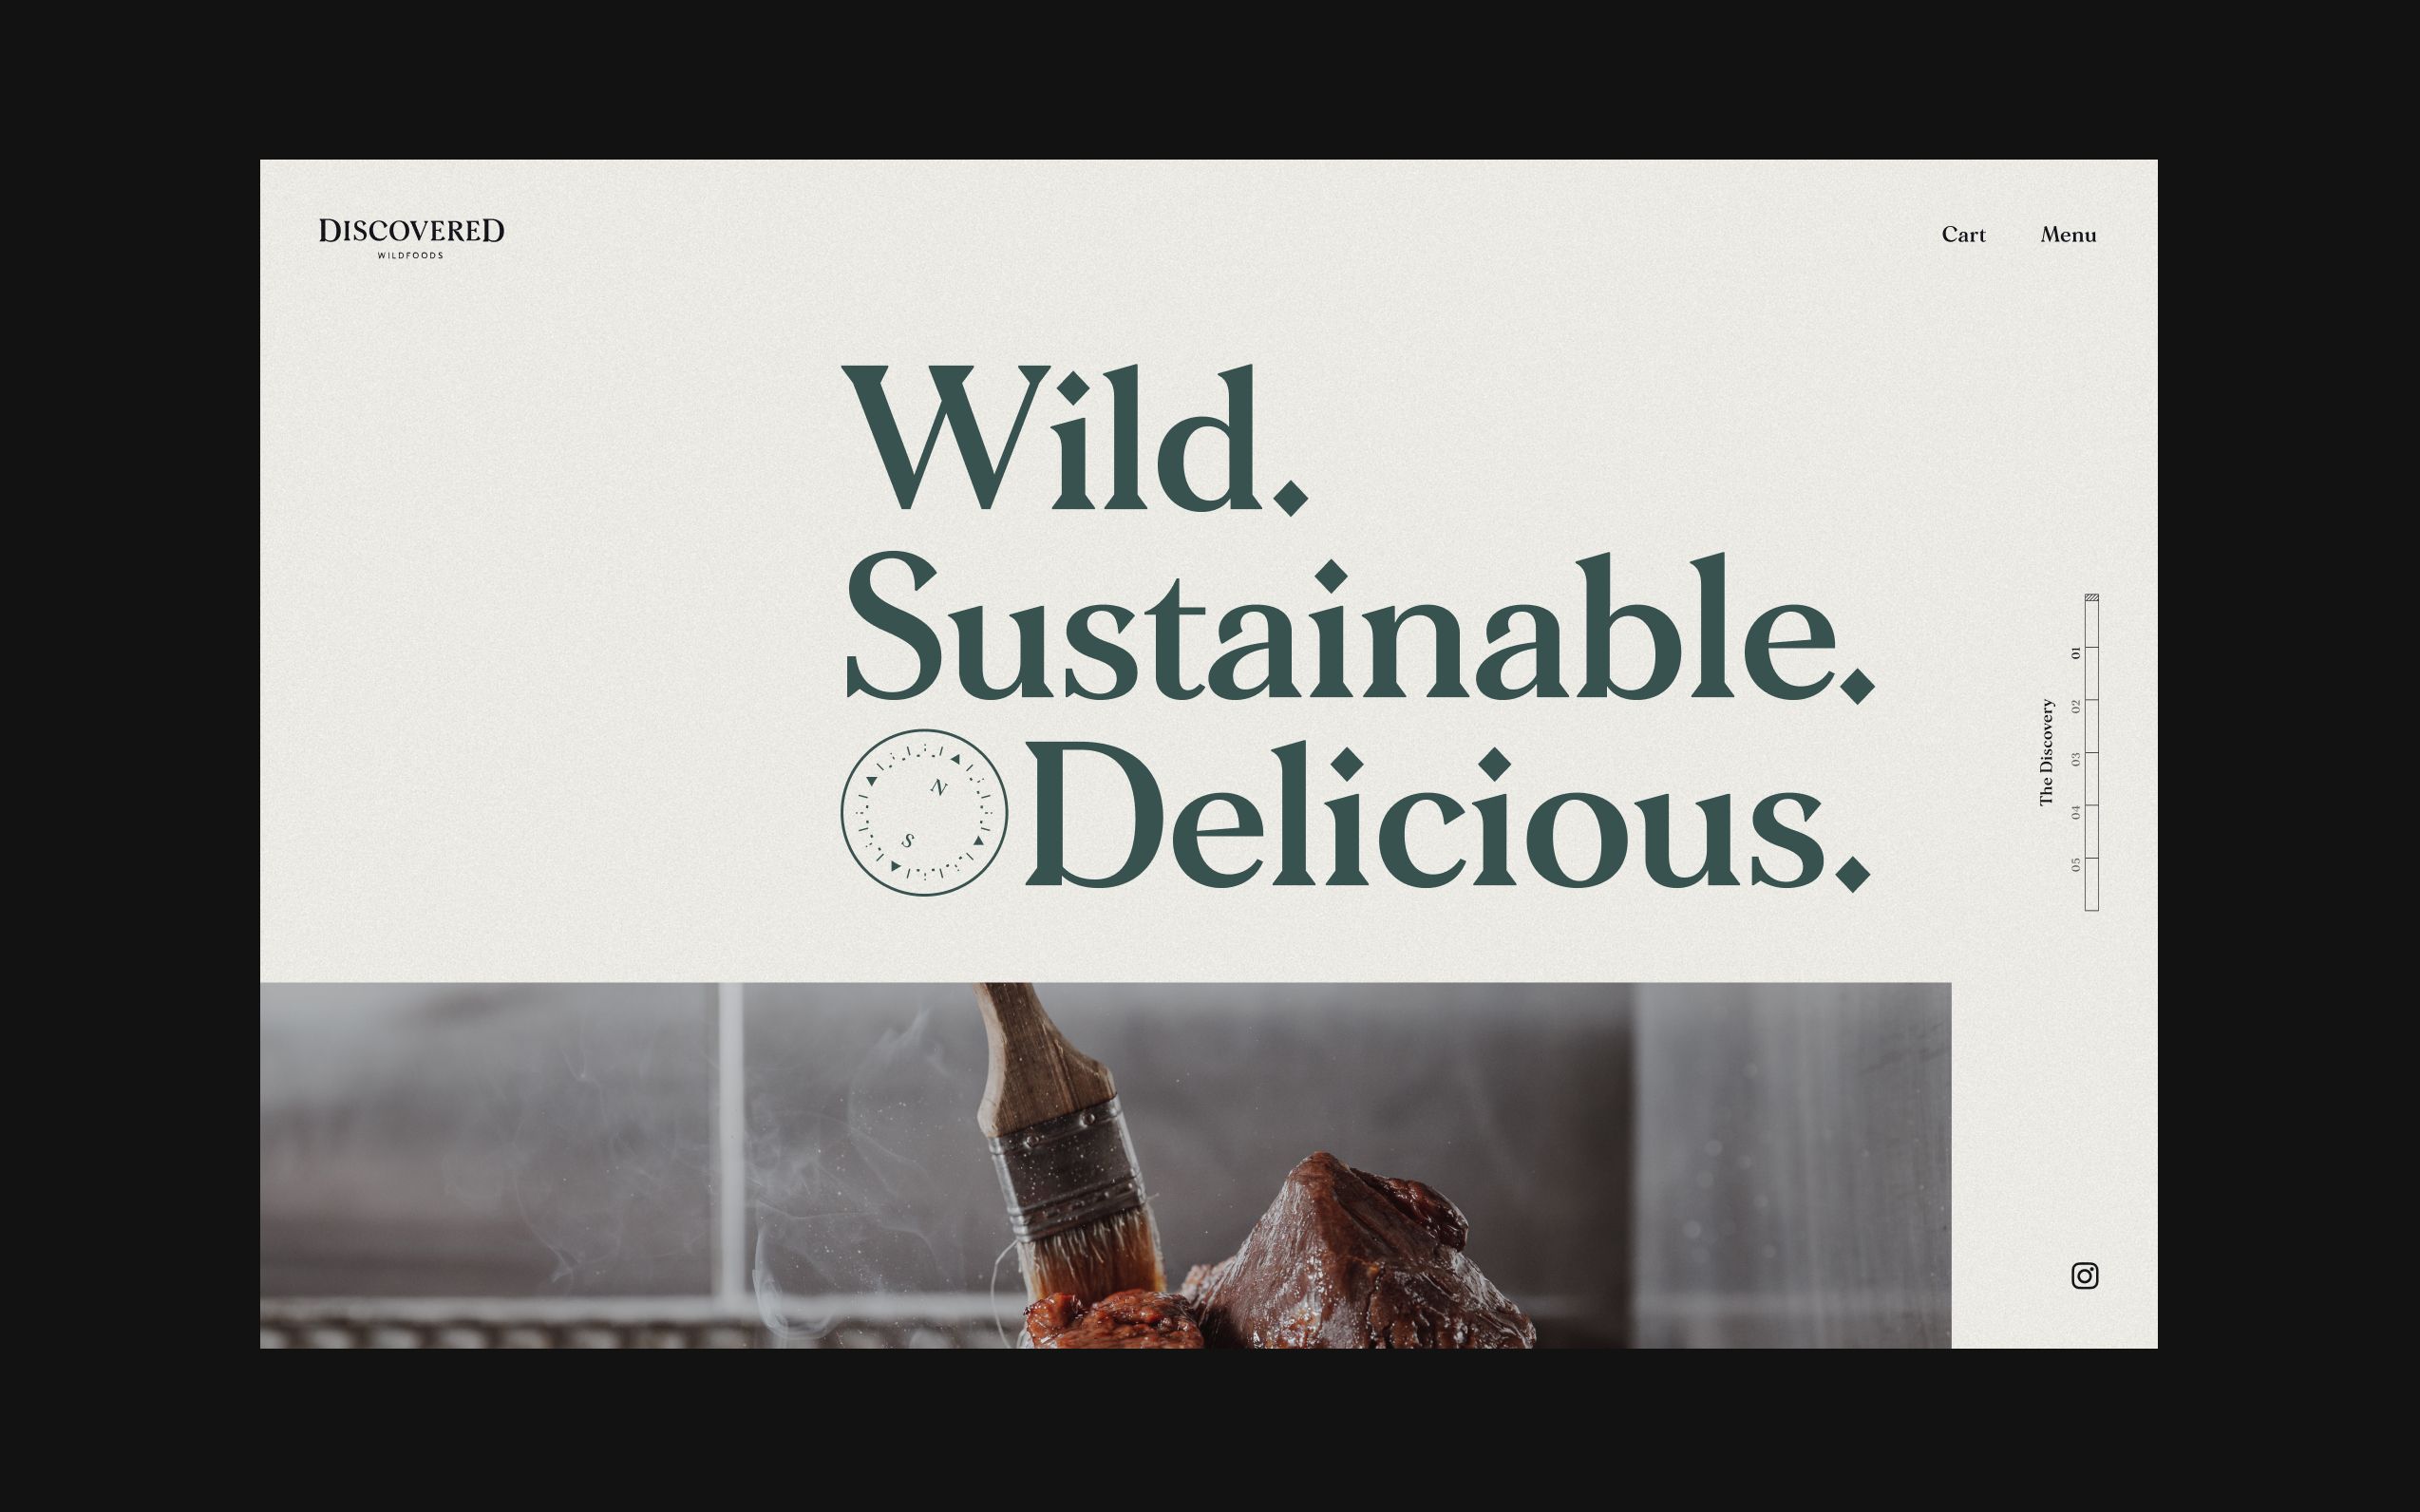 New desktop design of the Discovered Foods website home page.